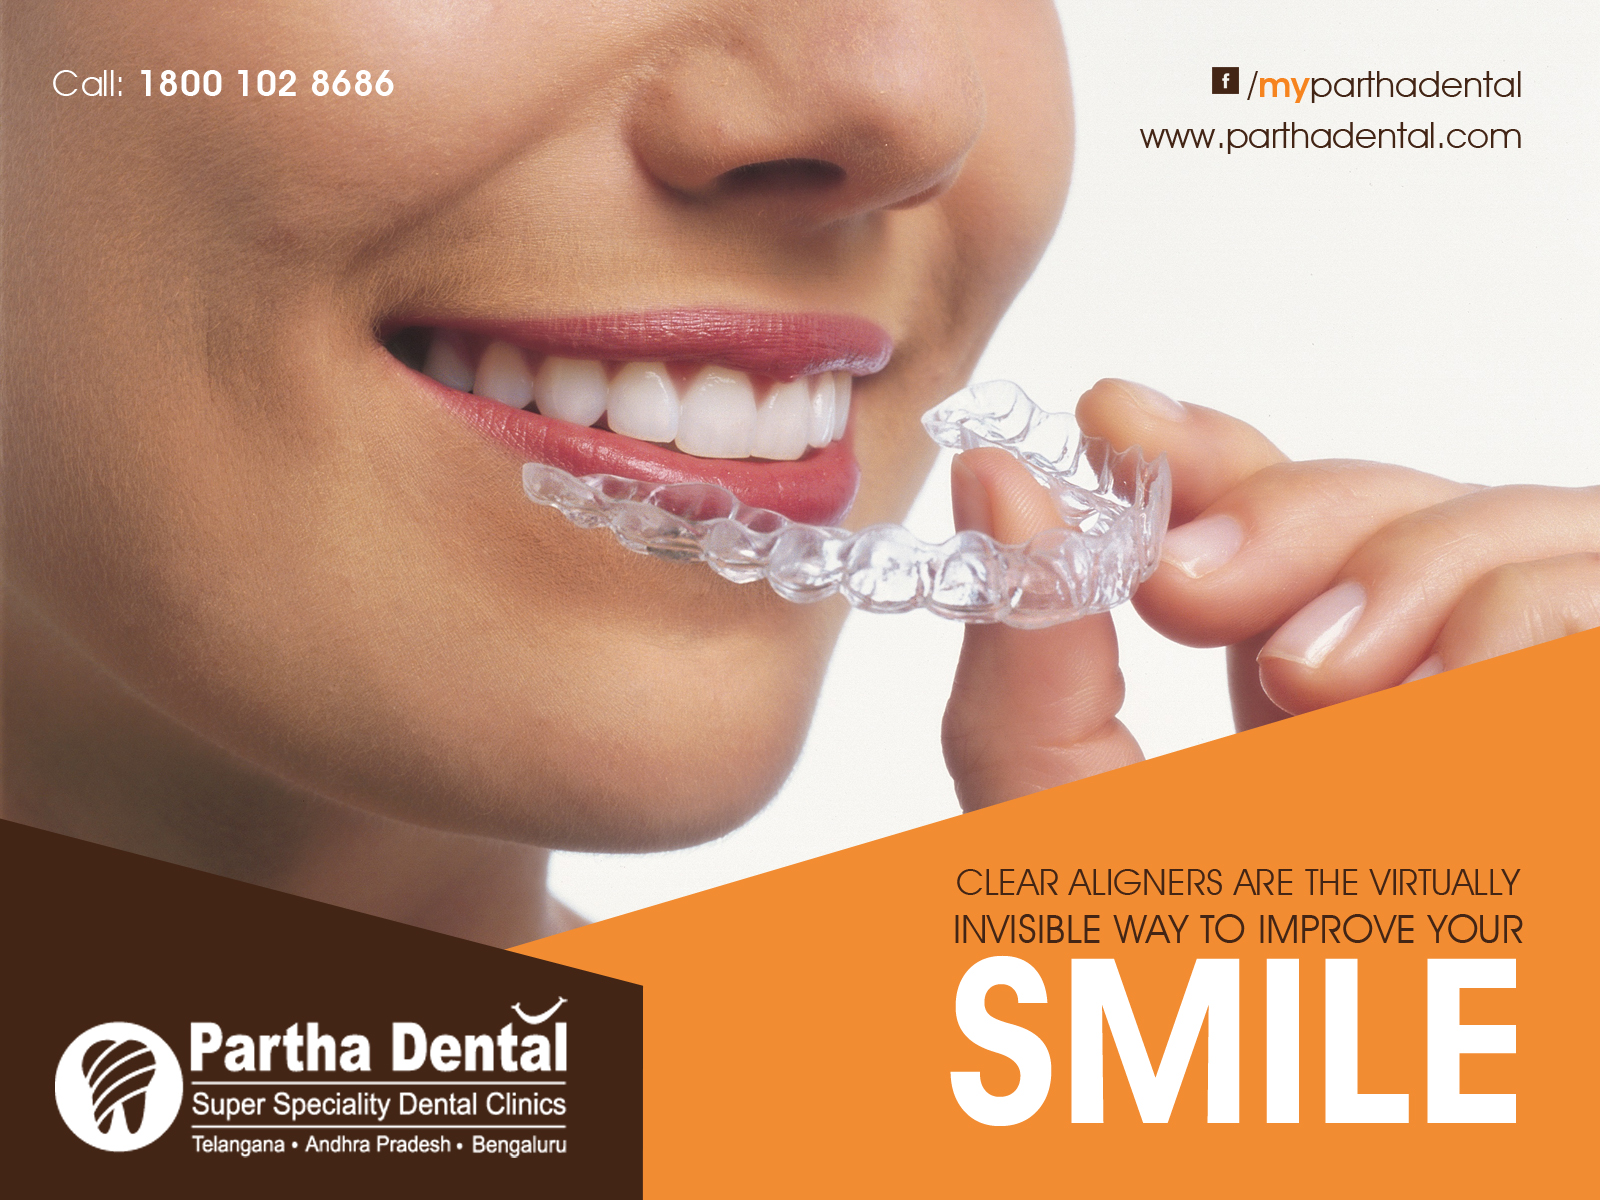 Enhance Your Smile With Tooth Aligners At Partha Dental